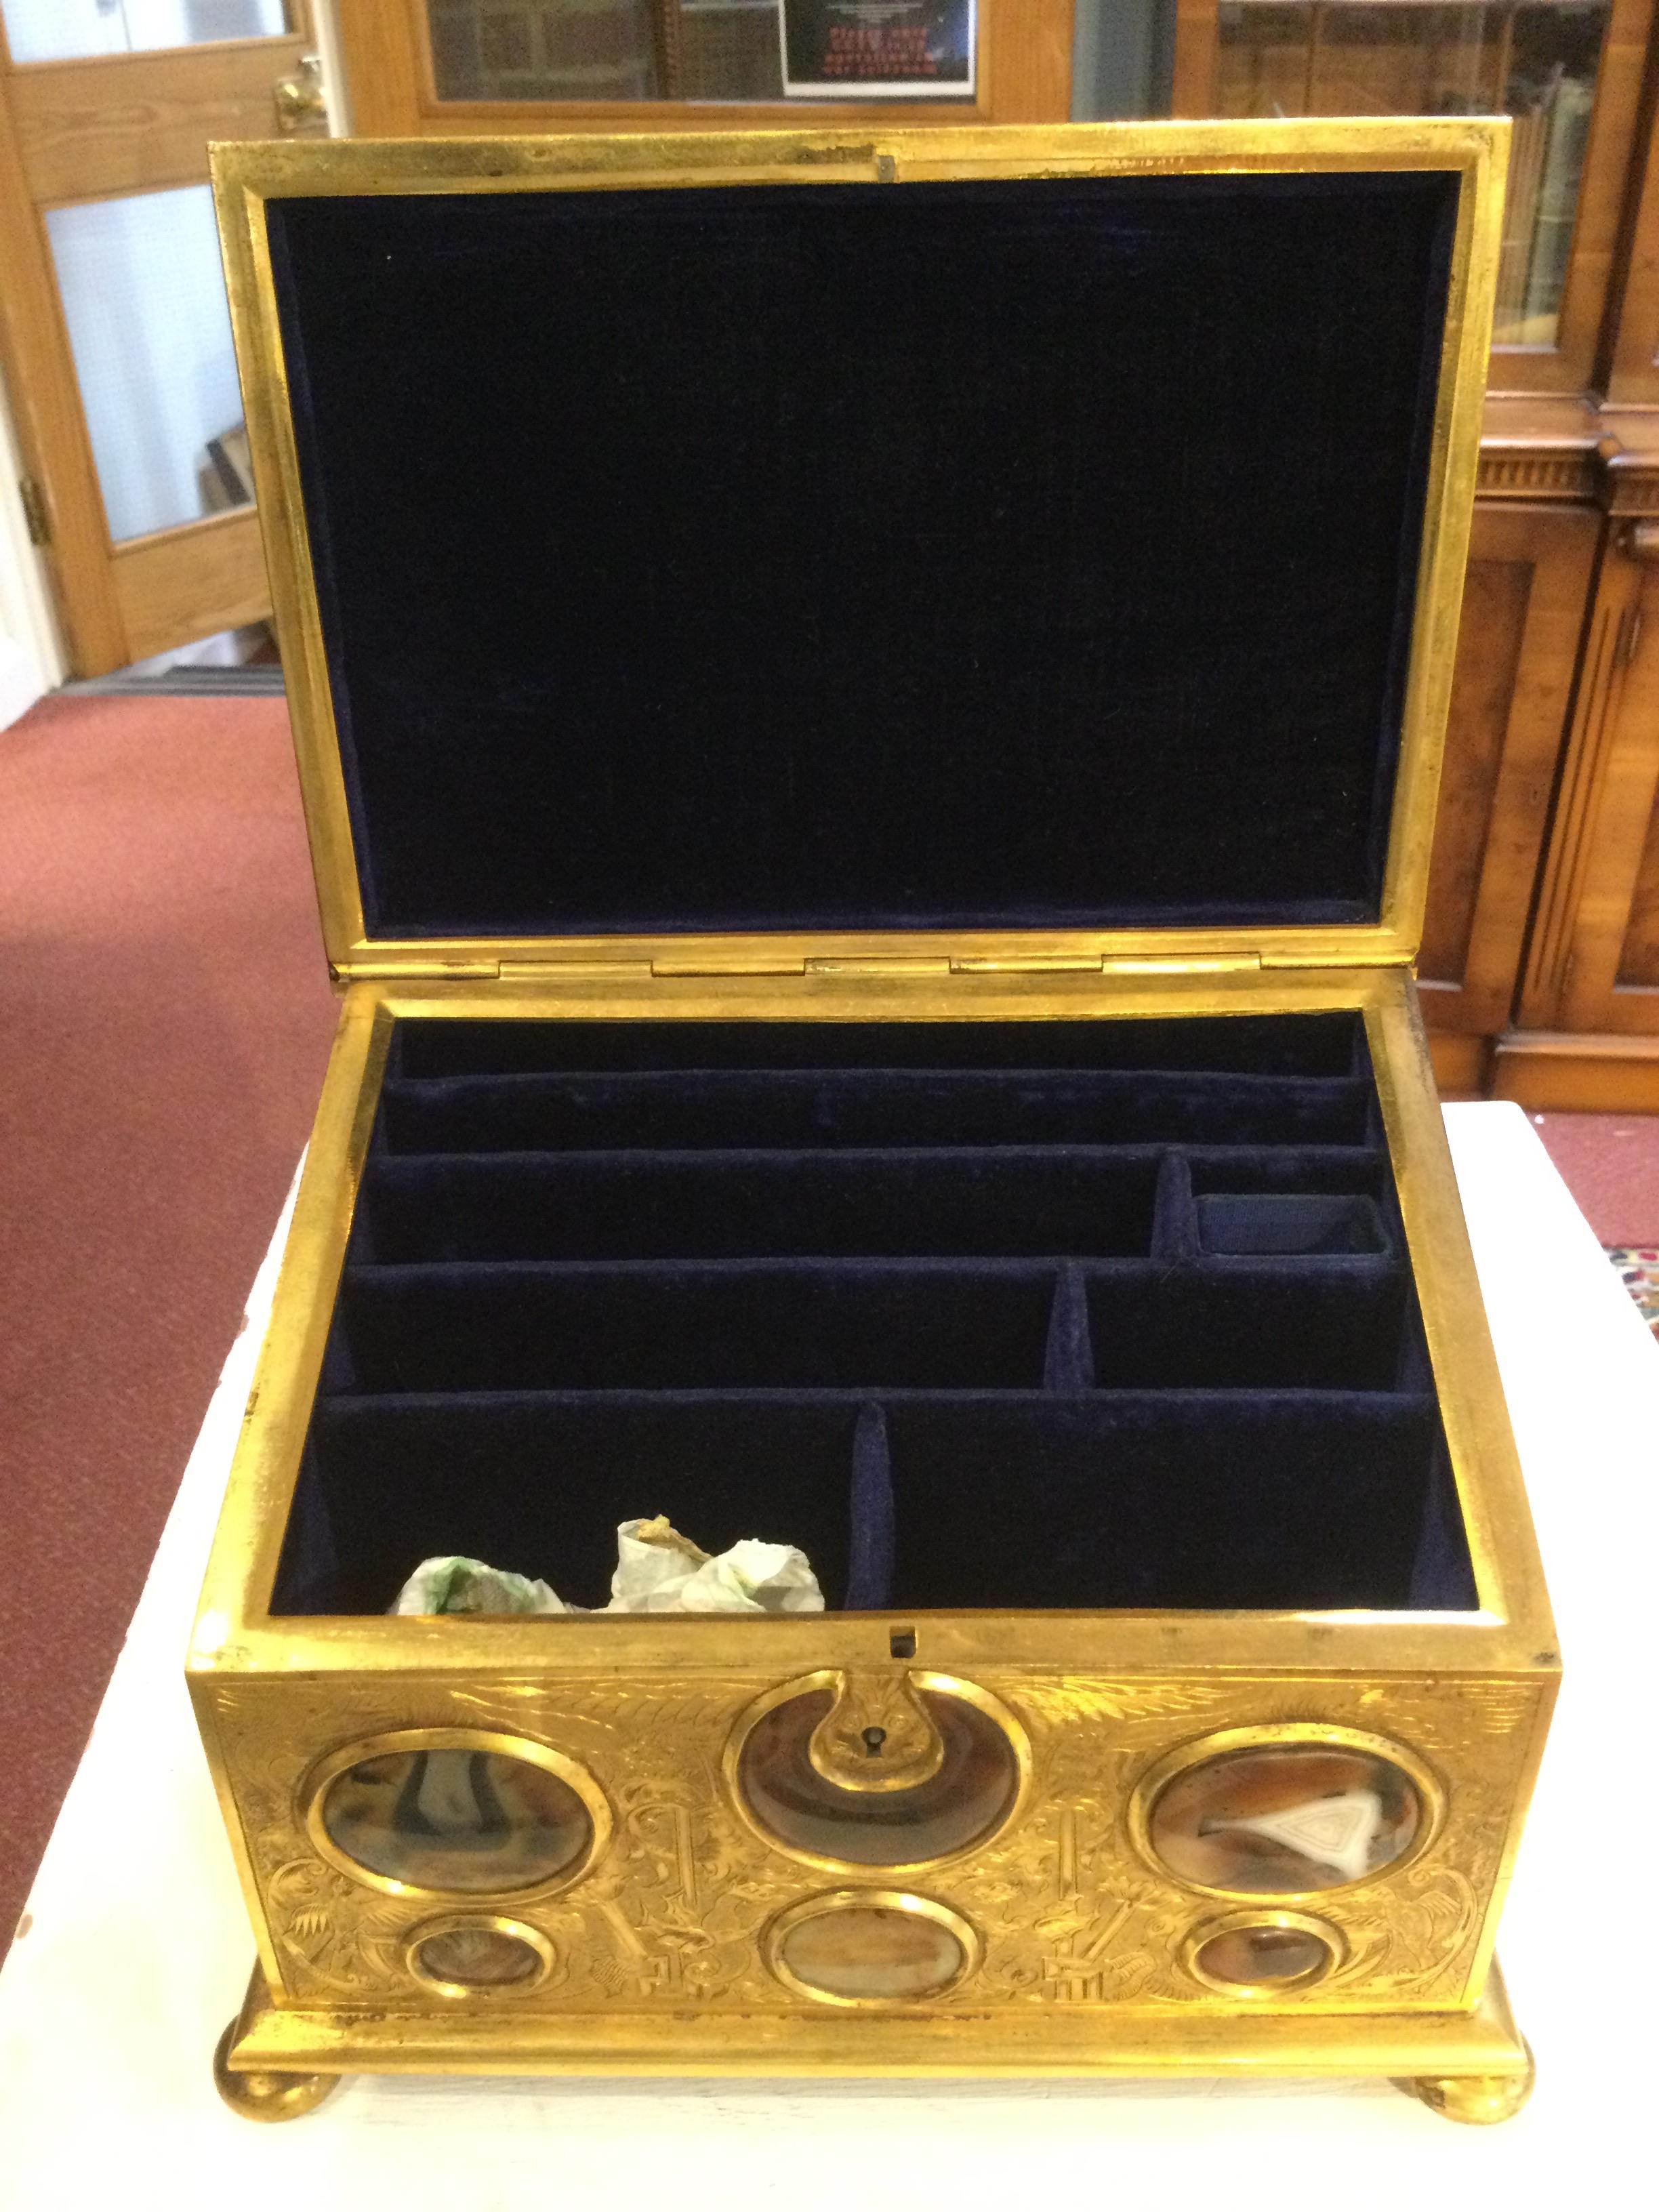 A 19th century correspondence gilt box with engraved decoration and inset cabochon stones hardstones - Image 20 of 25